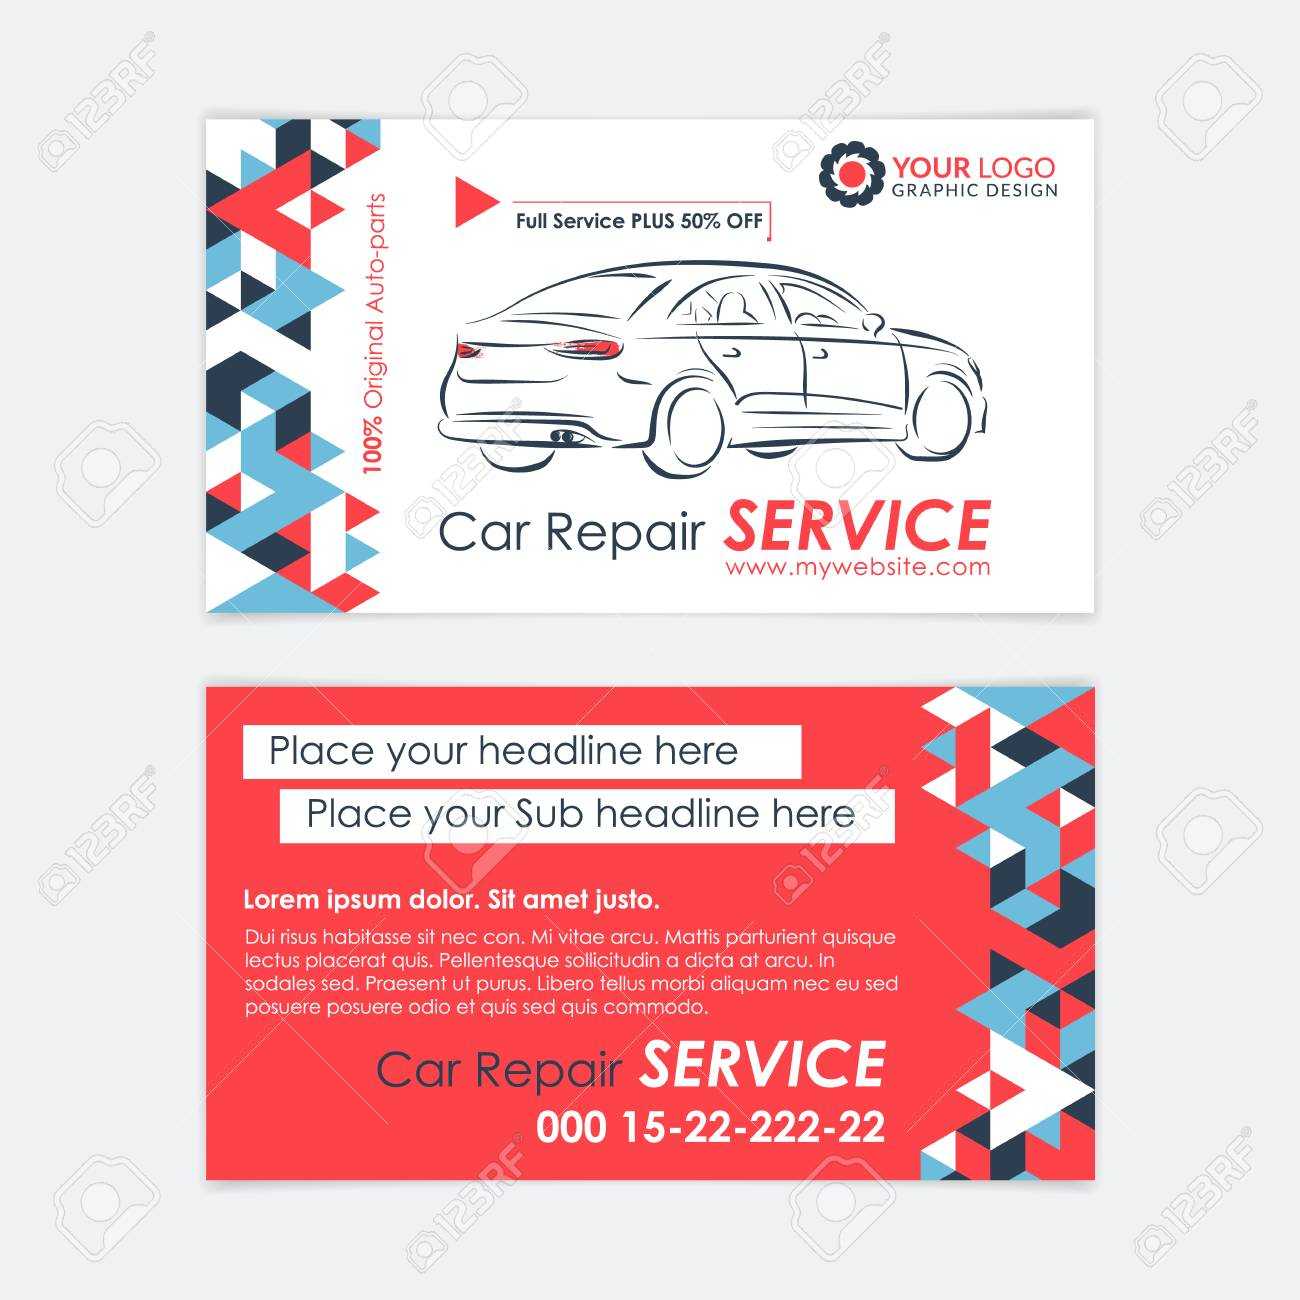 Transport Business Cards Templates Free